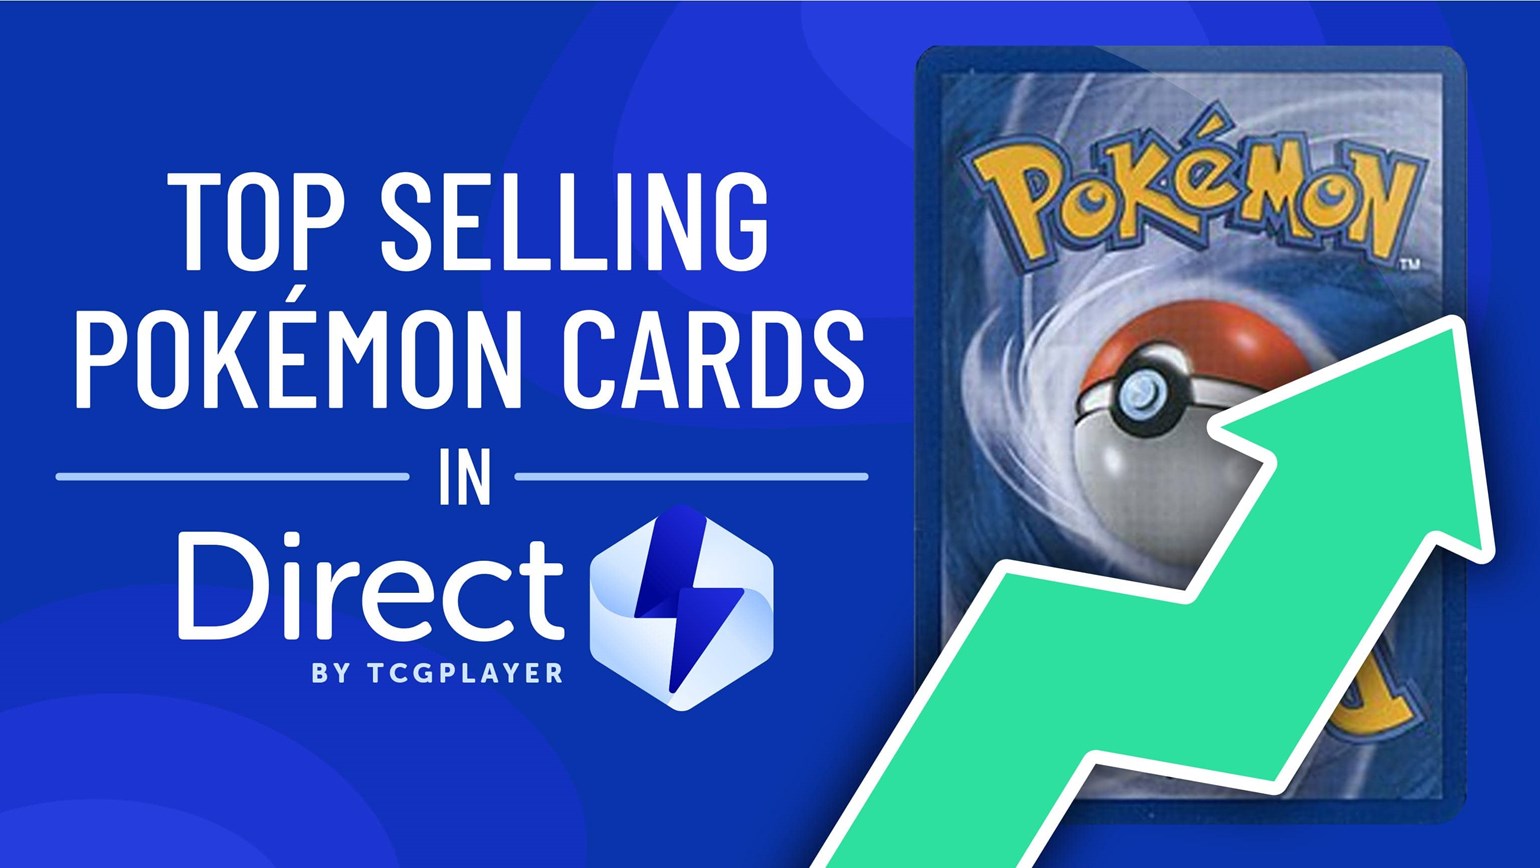 March 2022 Top Selling Pokémon Cards in Direct by TCGplayer